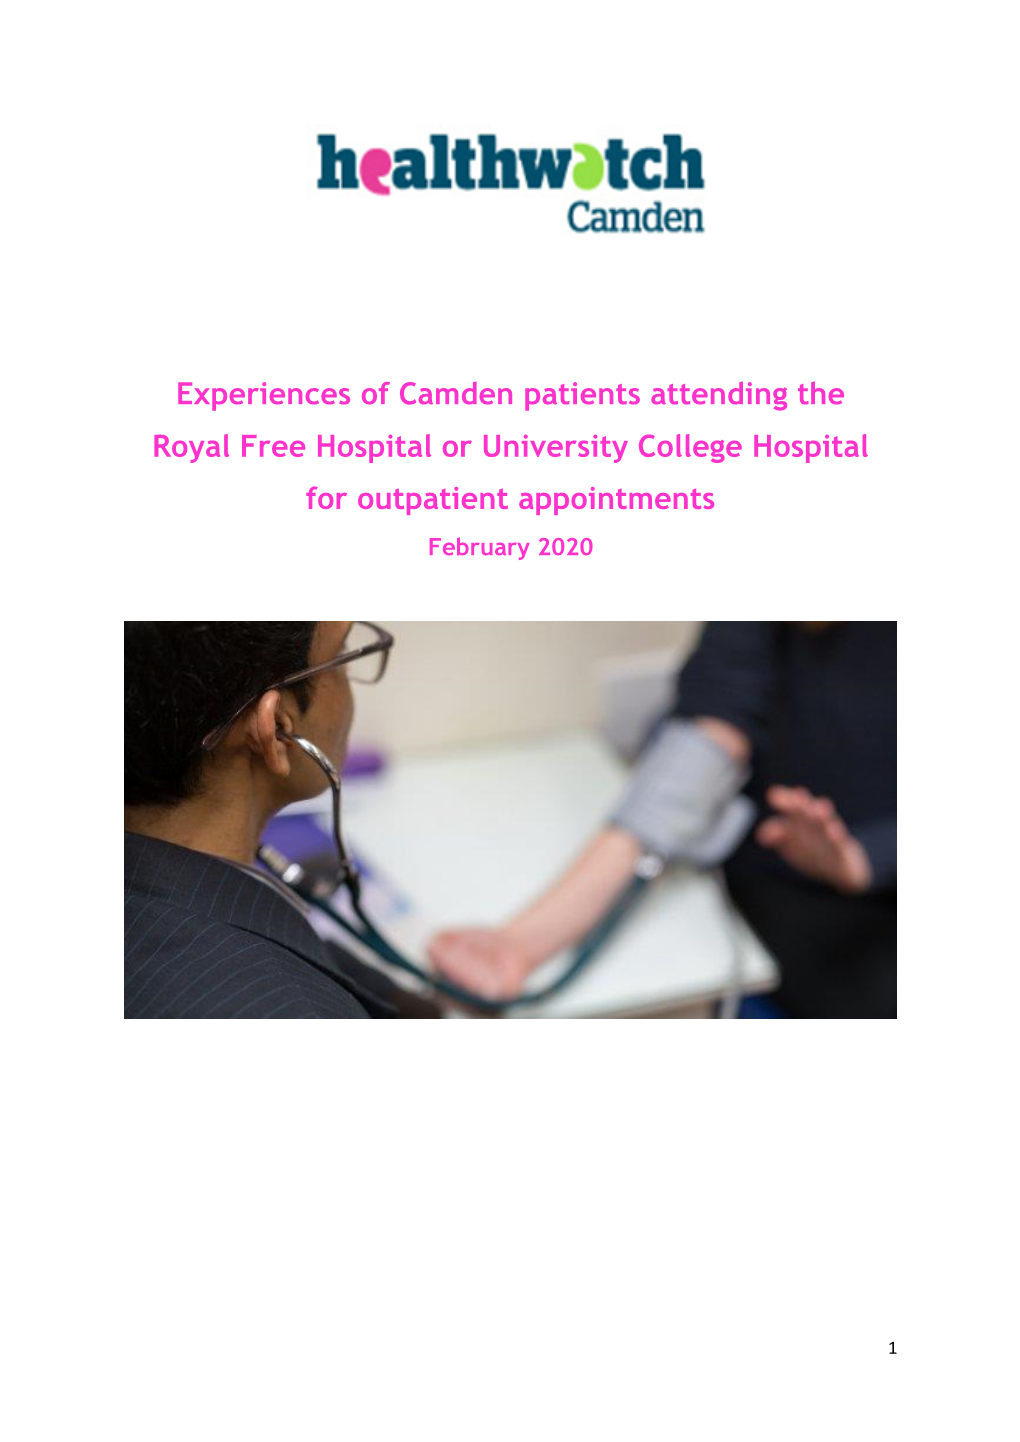 Experiences of Camden Patients Attending the Royal Free Hospital Or University College Hospital for Outpatient Appointments February 2020